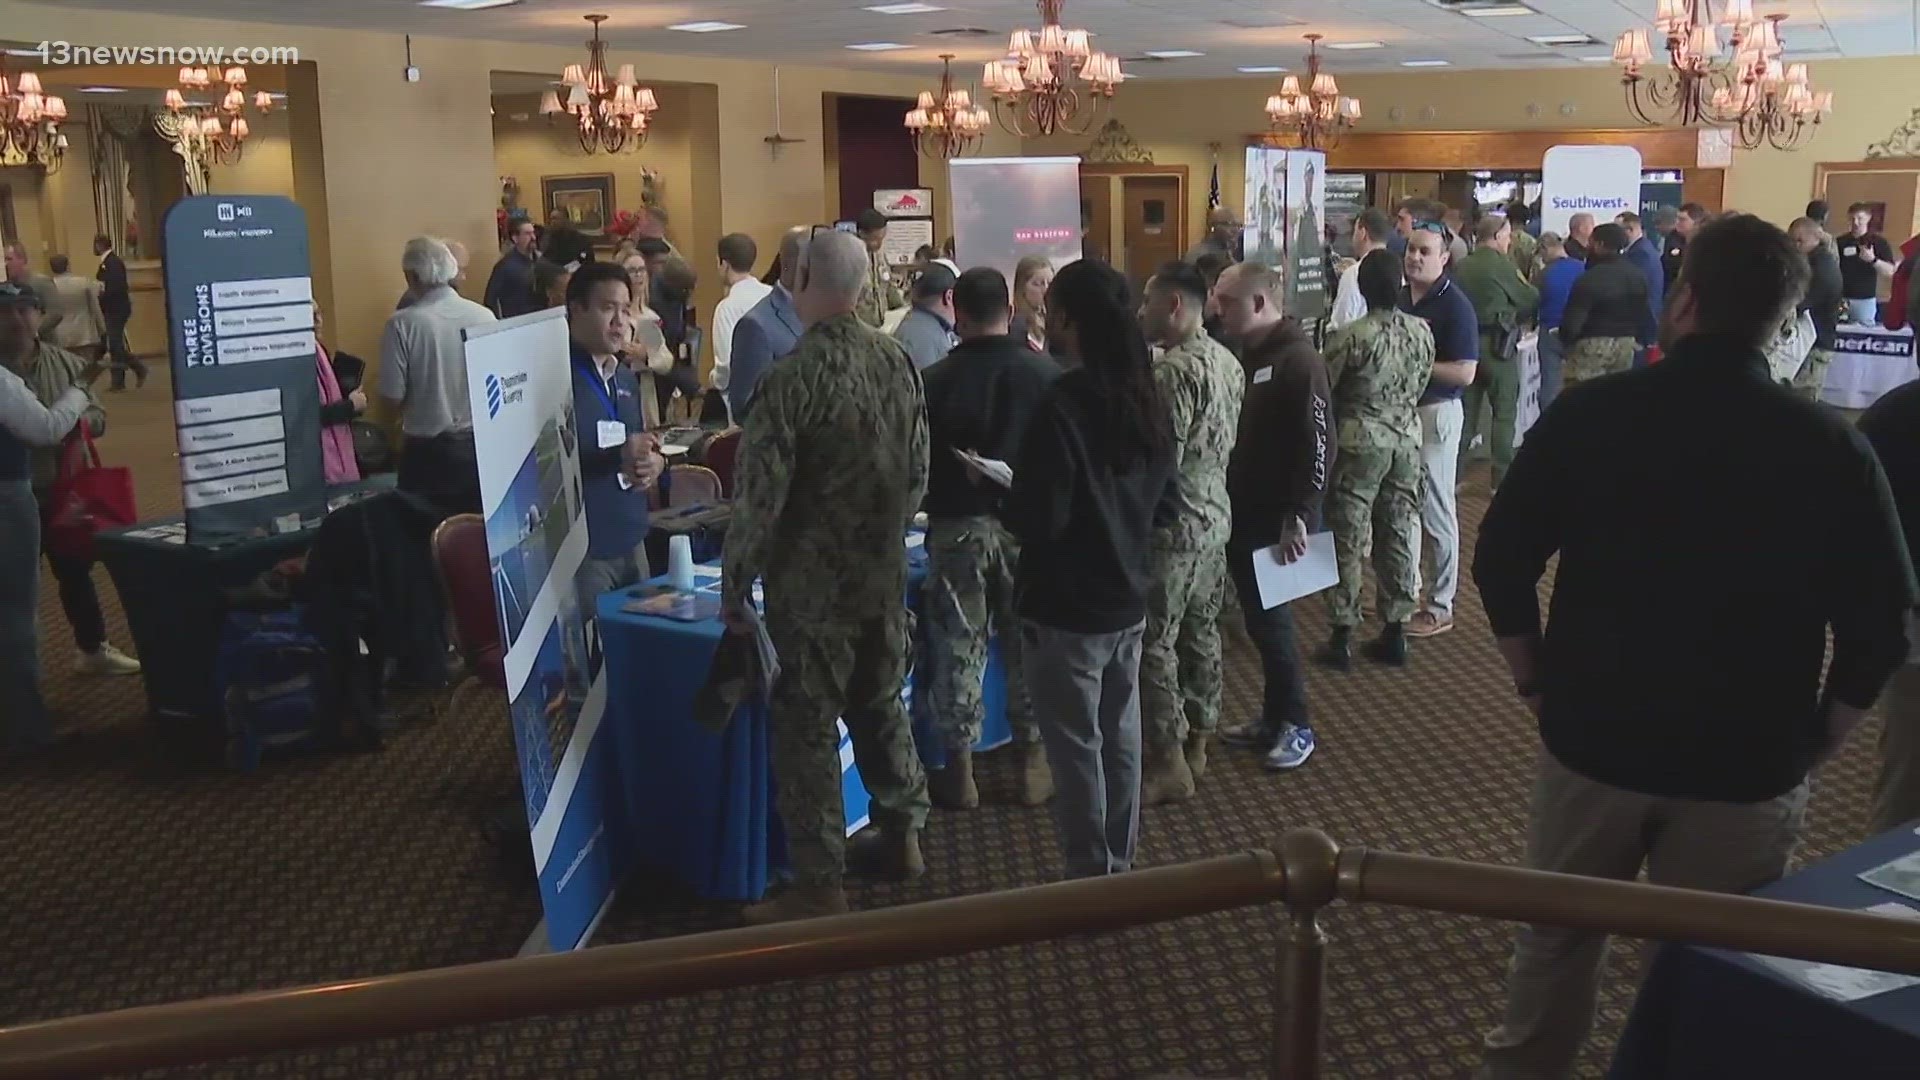 The Hire Vets Now event was designed to help service members and their spouses transition back into civilian life.